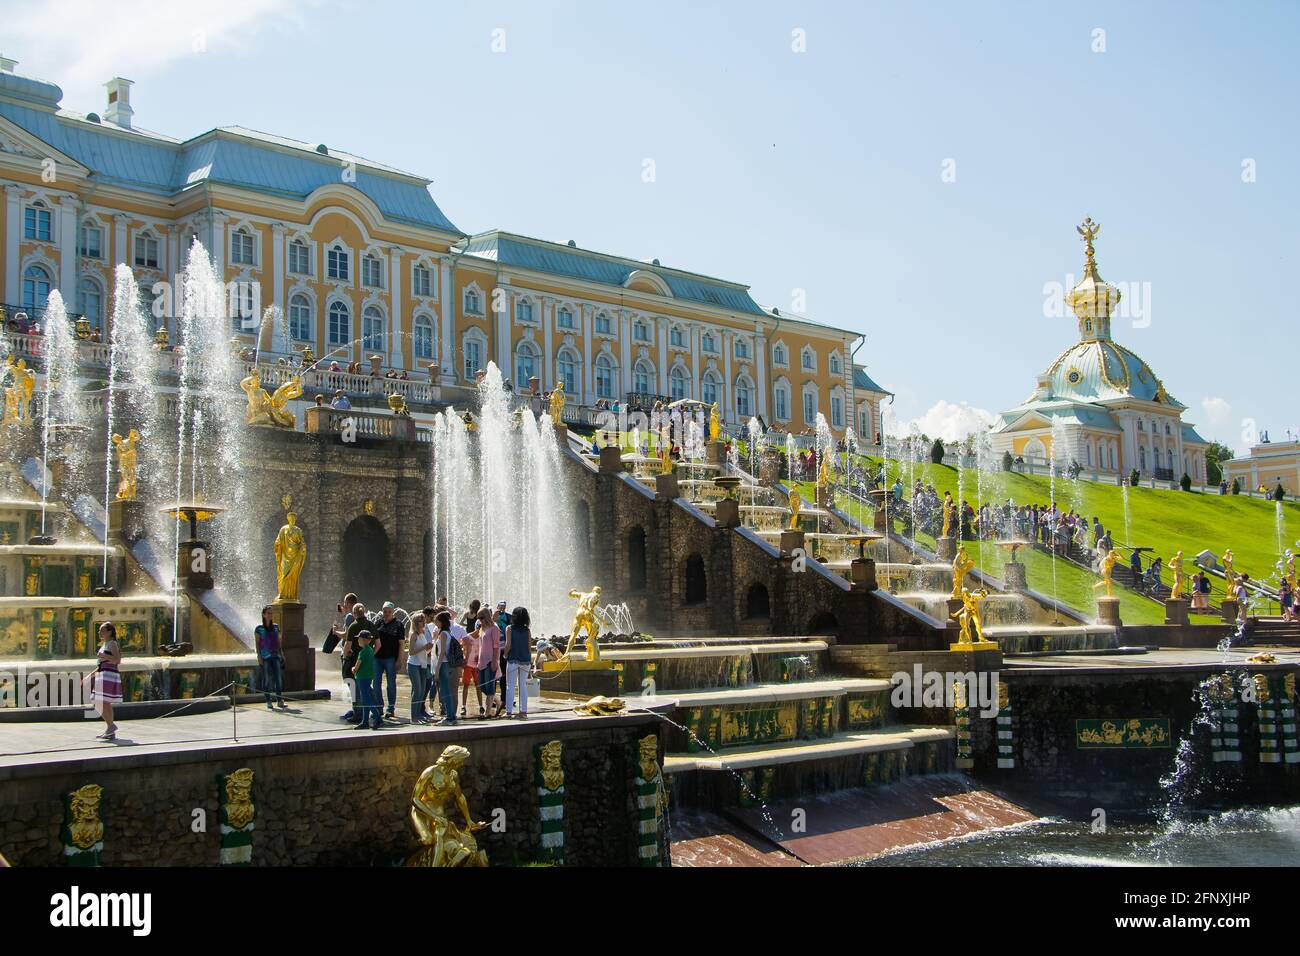 Peterhof, Russia: July 16, 2016 - the palace park. Celebration of the opening of the fountains. Tourists visiting the landmark of St. Petersburg. Stock Photo